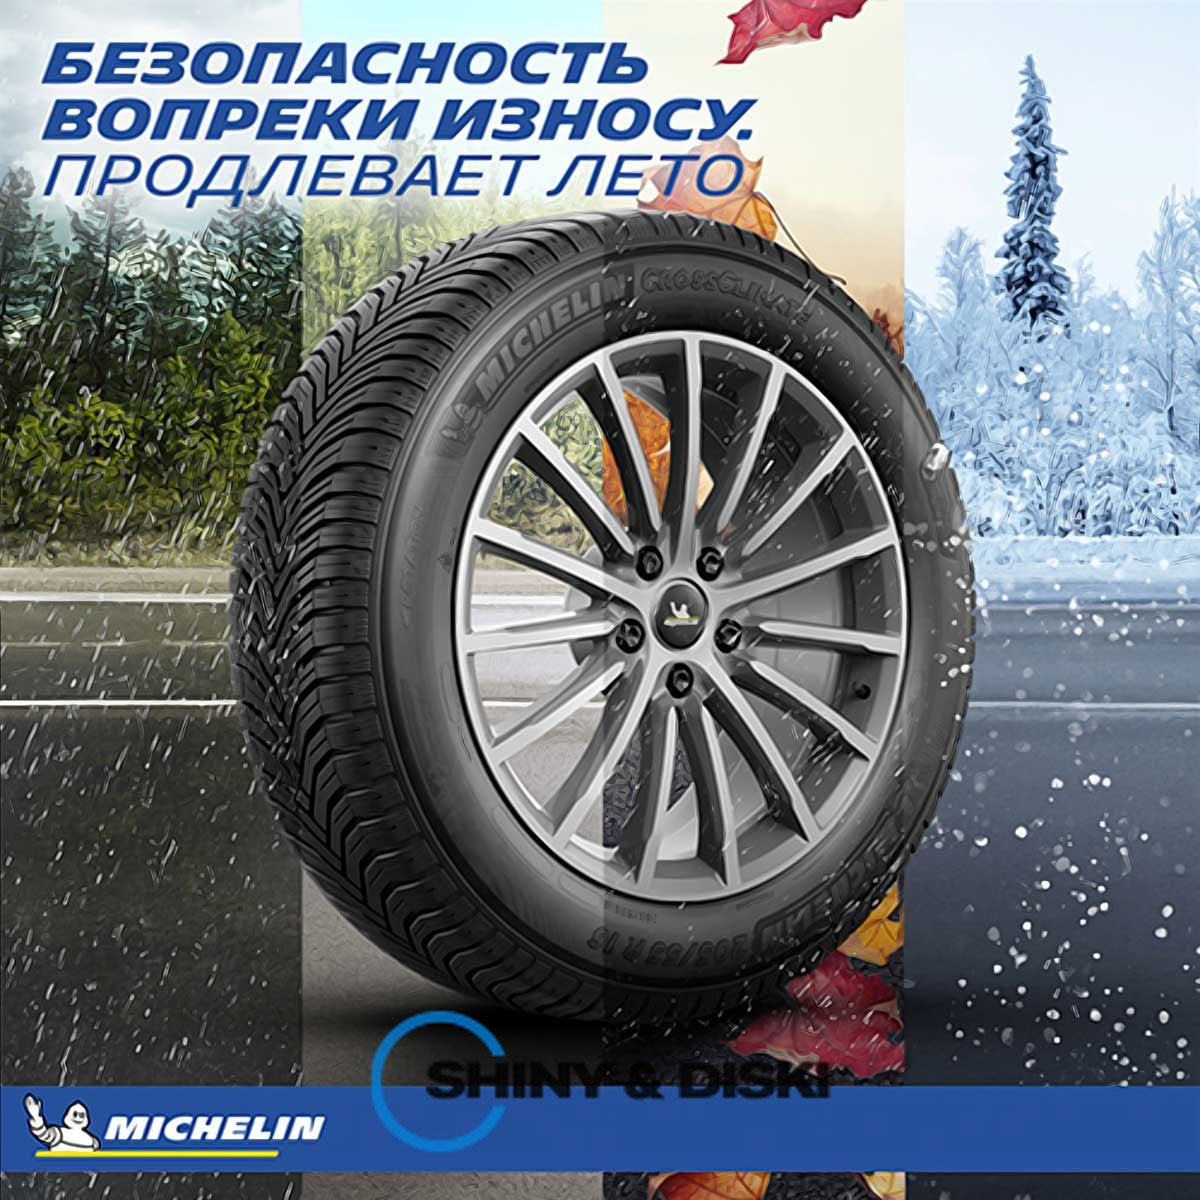 покрышки michelin cross climate+ 225/55 r18 102v xl